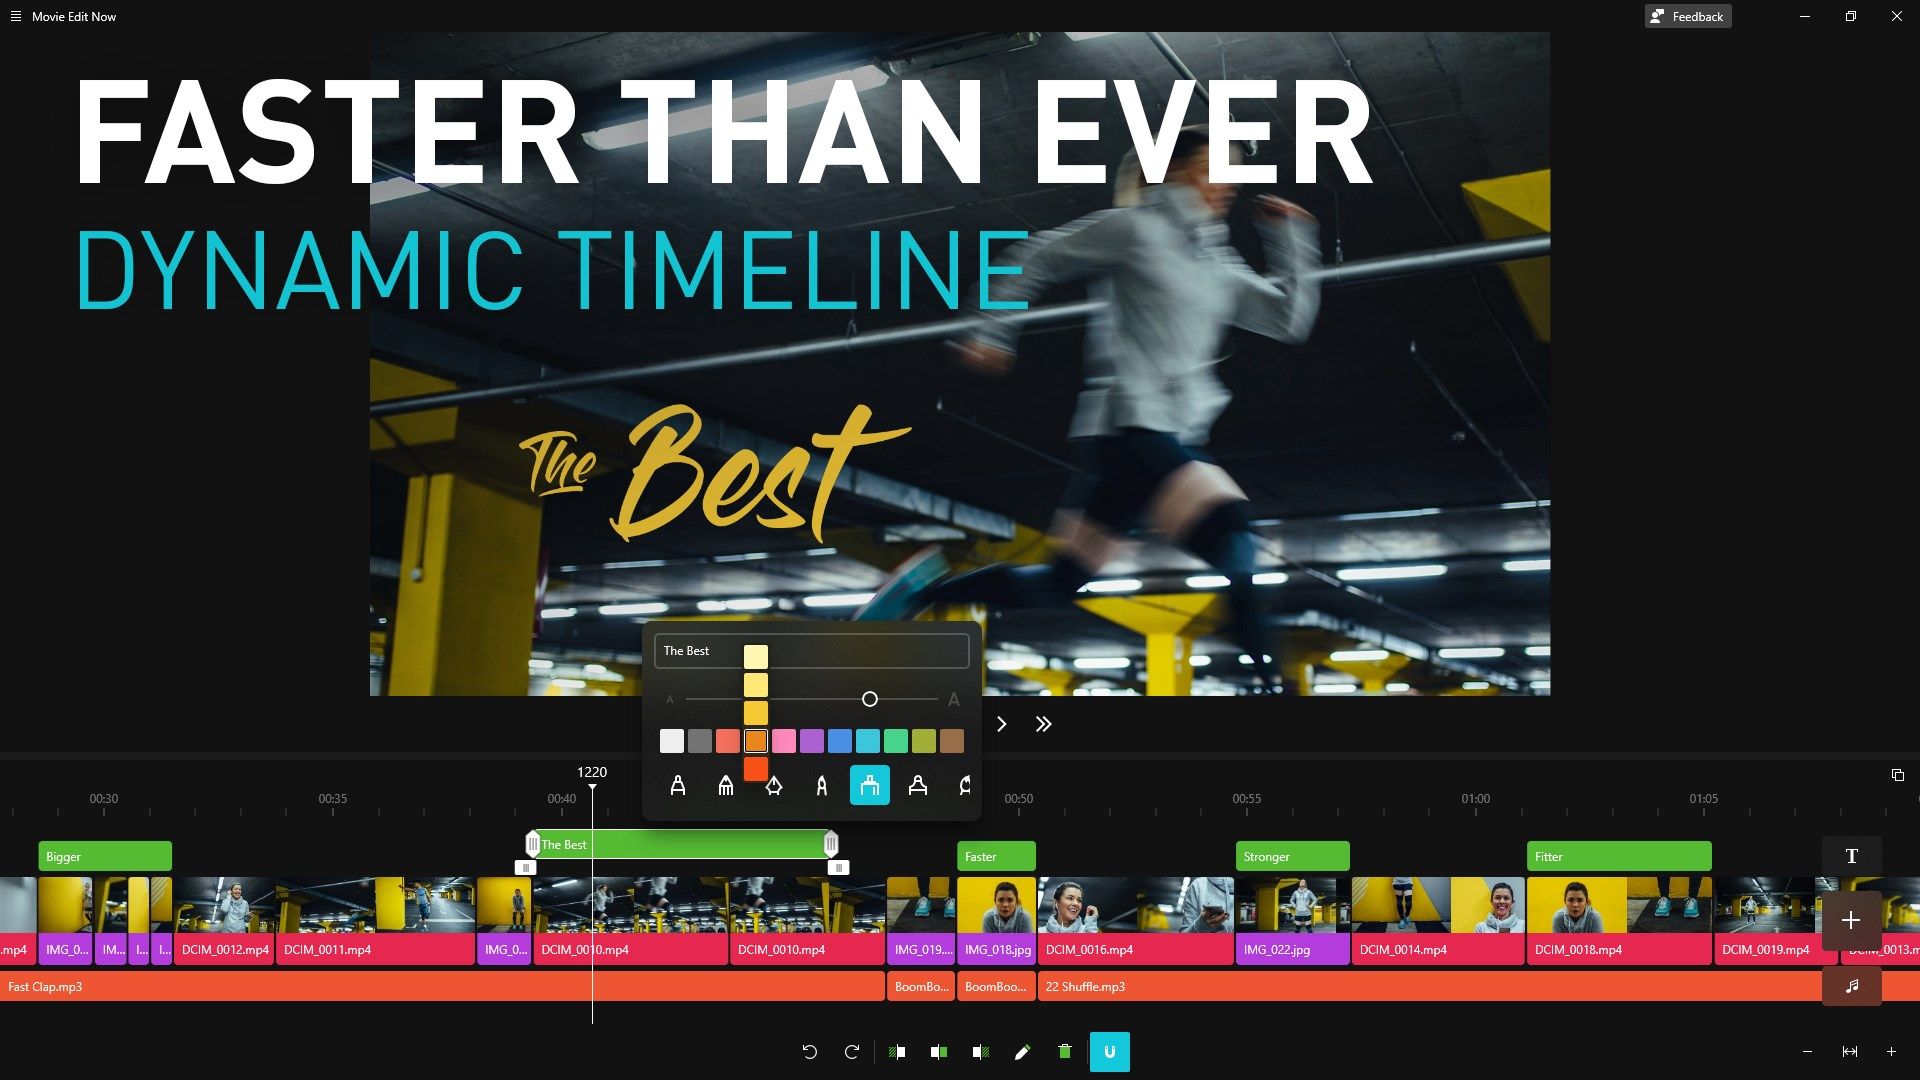 Movie Edit Now - Faster Than Ever